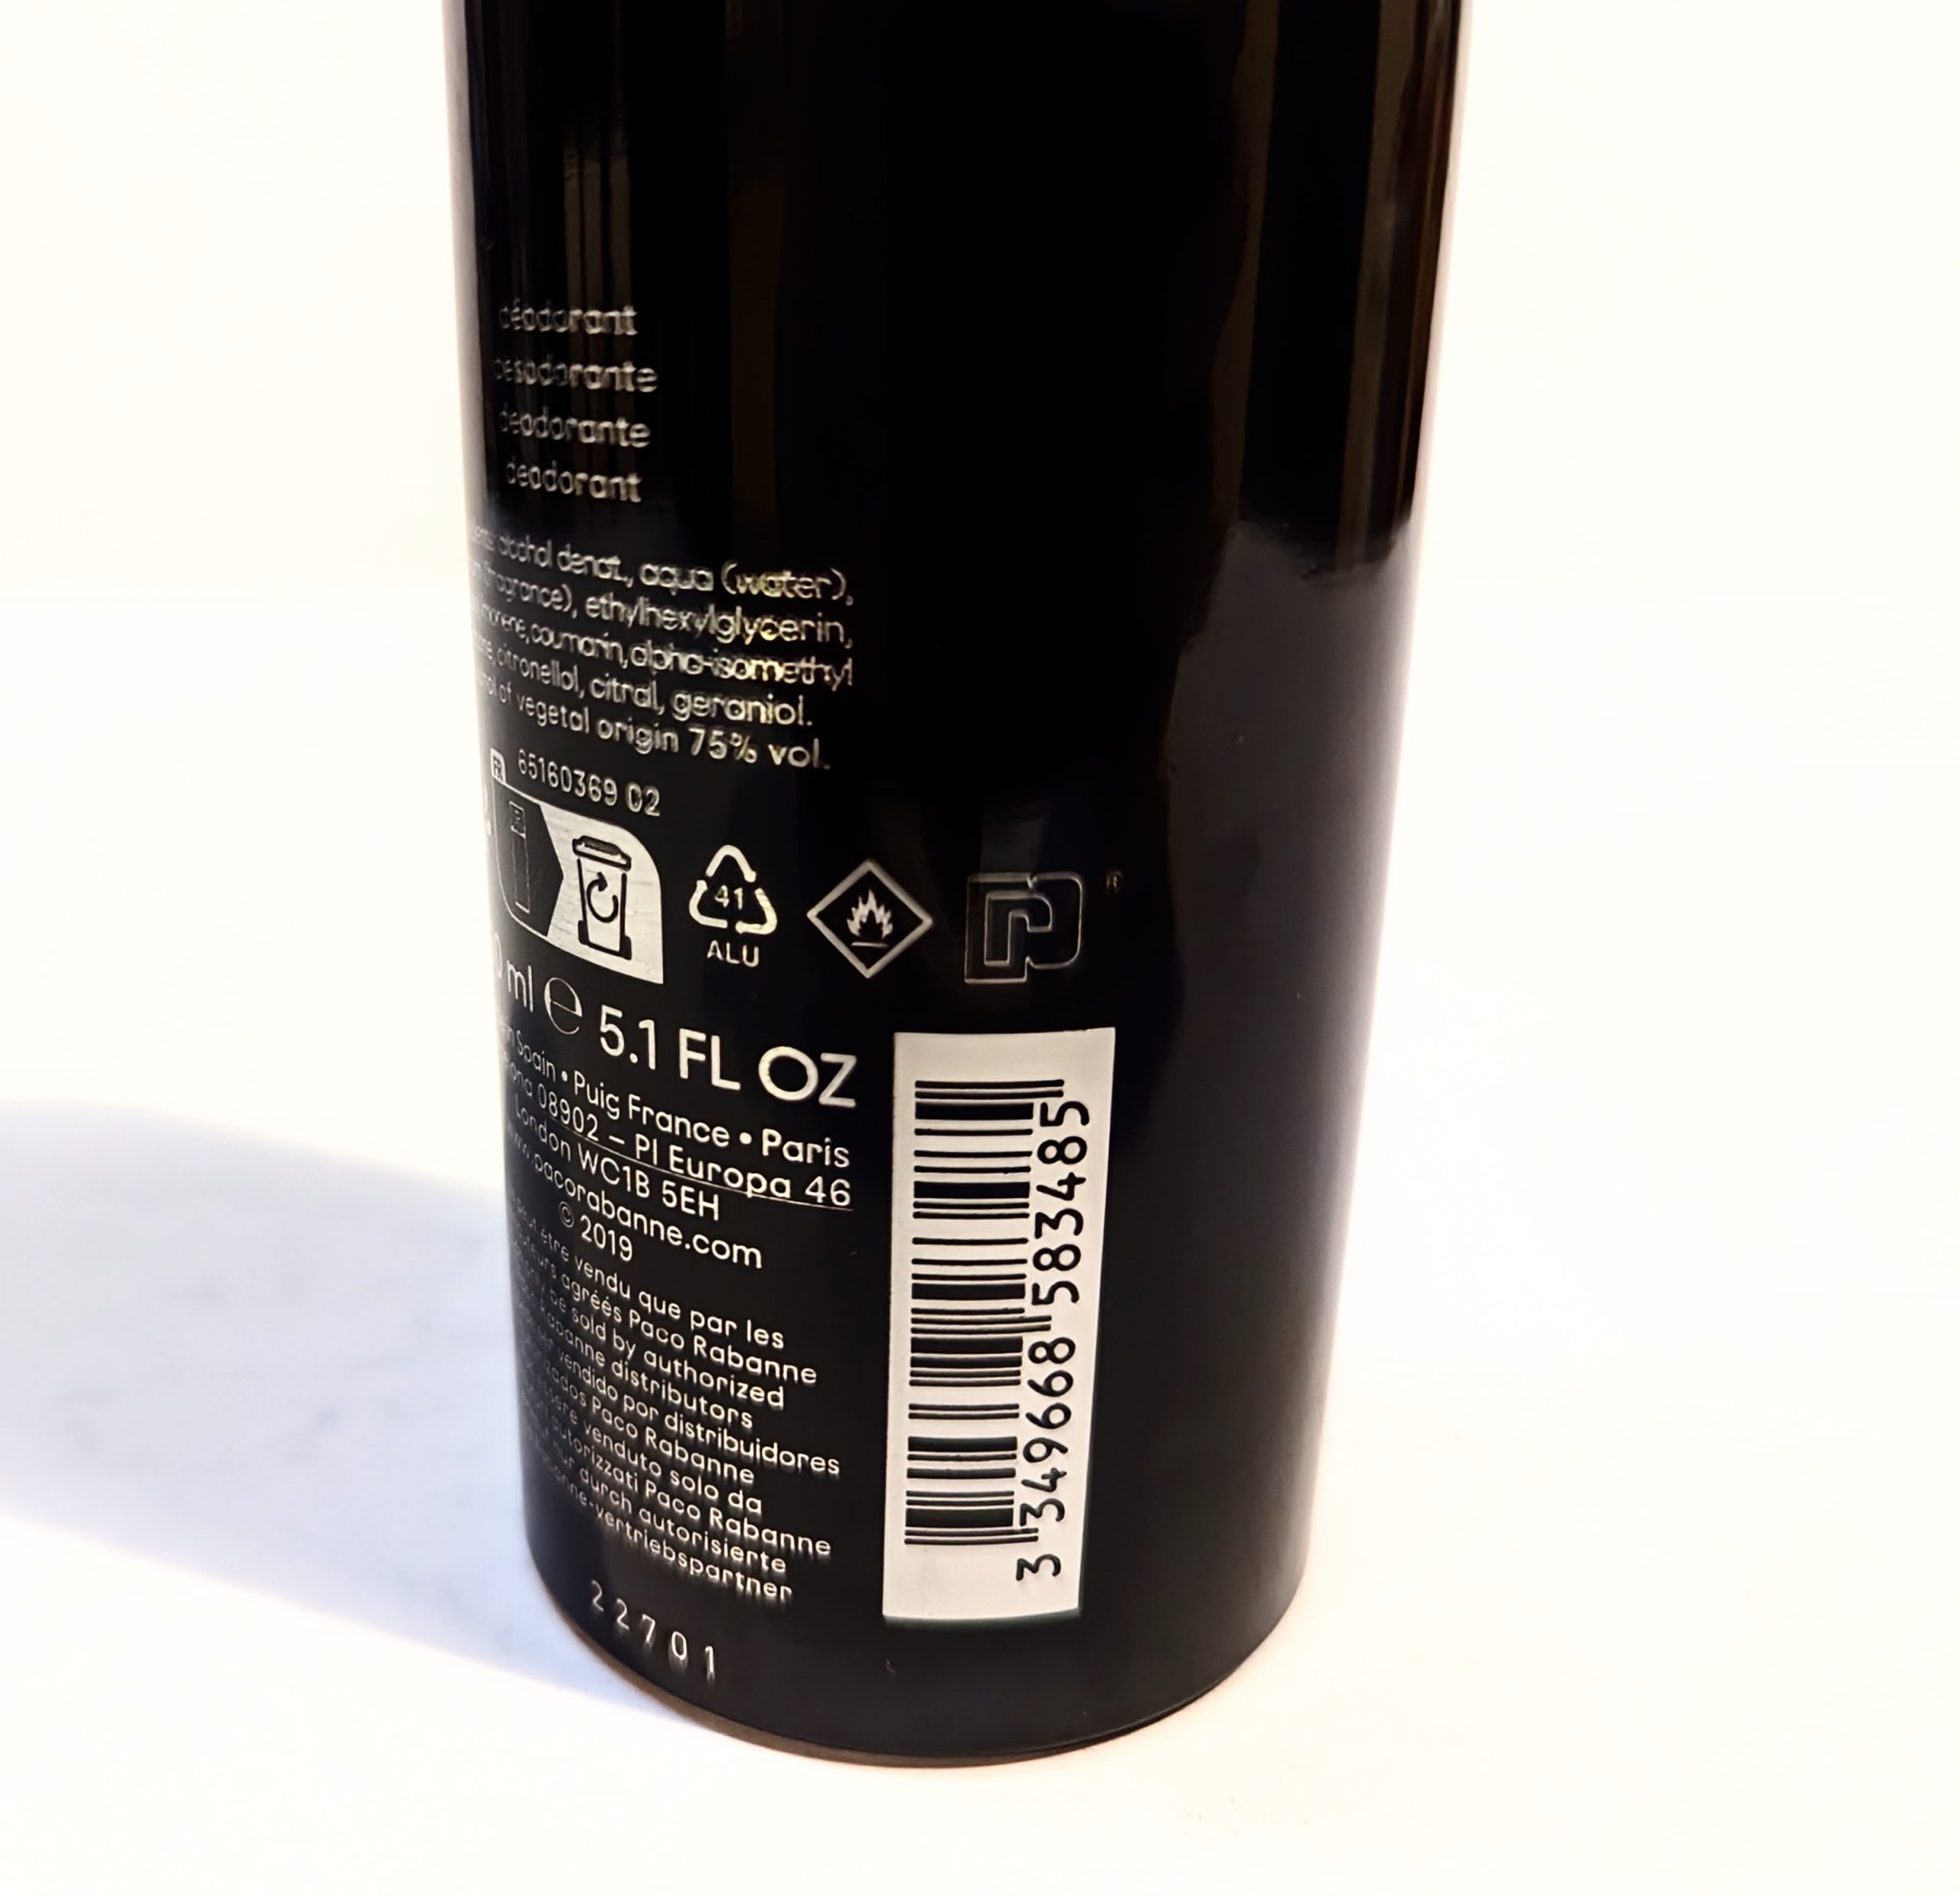 A black canister with deodorant ingredients and product information on the back, including a barcode, a capacity of 5.1 fl oz, and text in multiple languages.